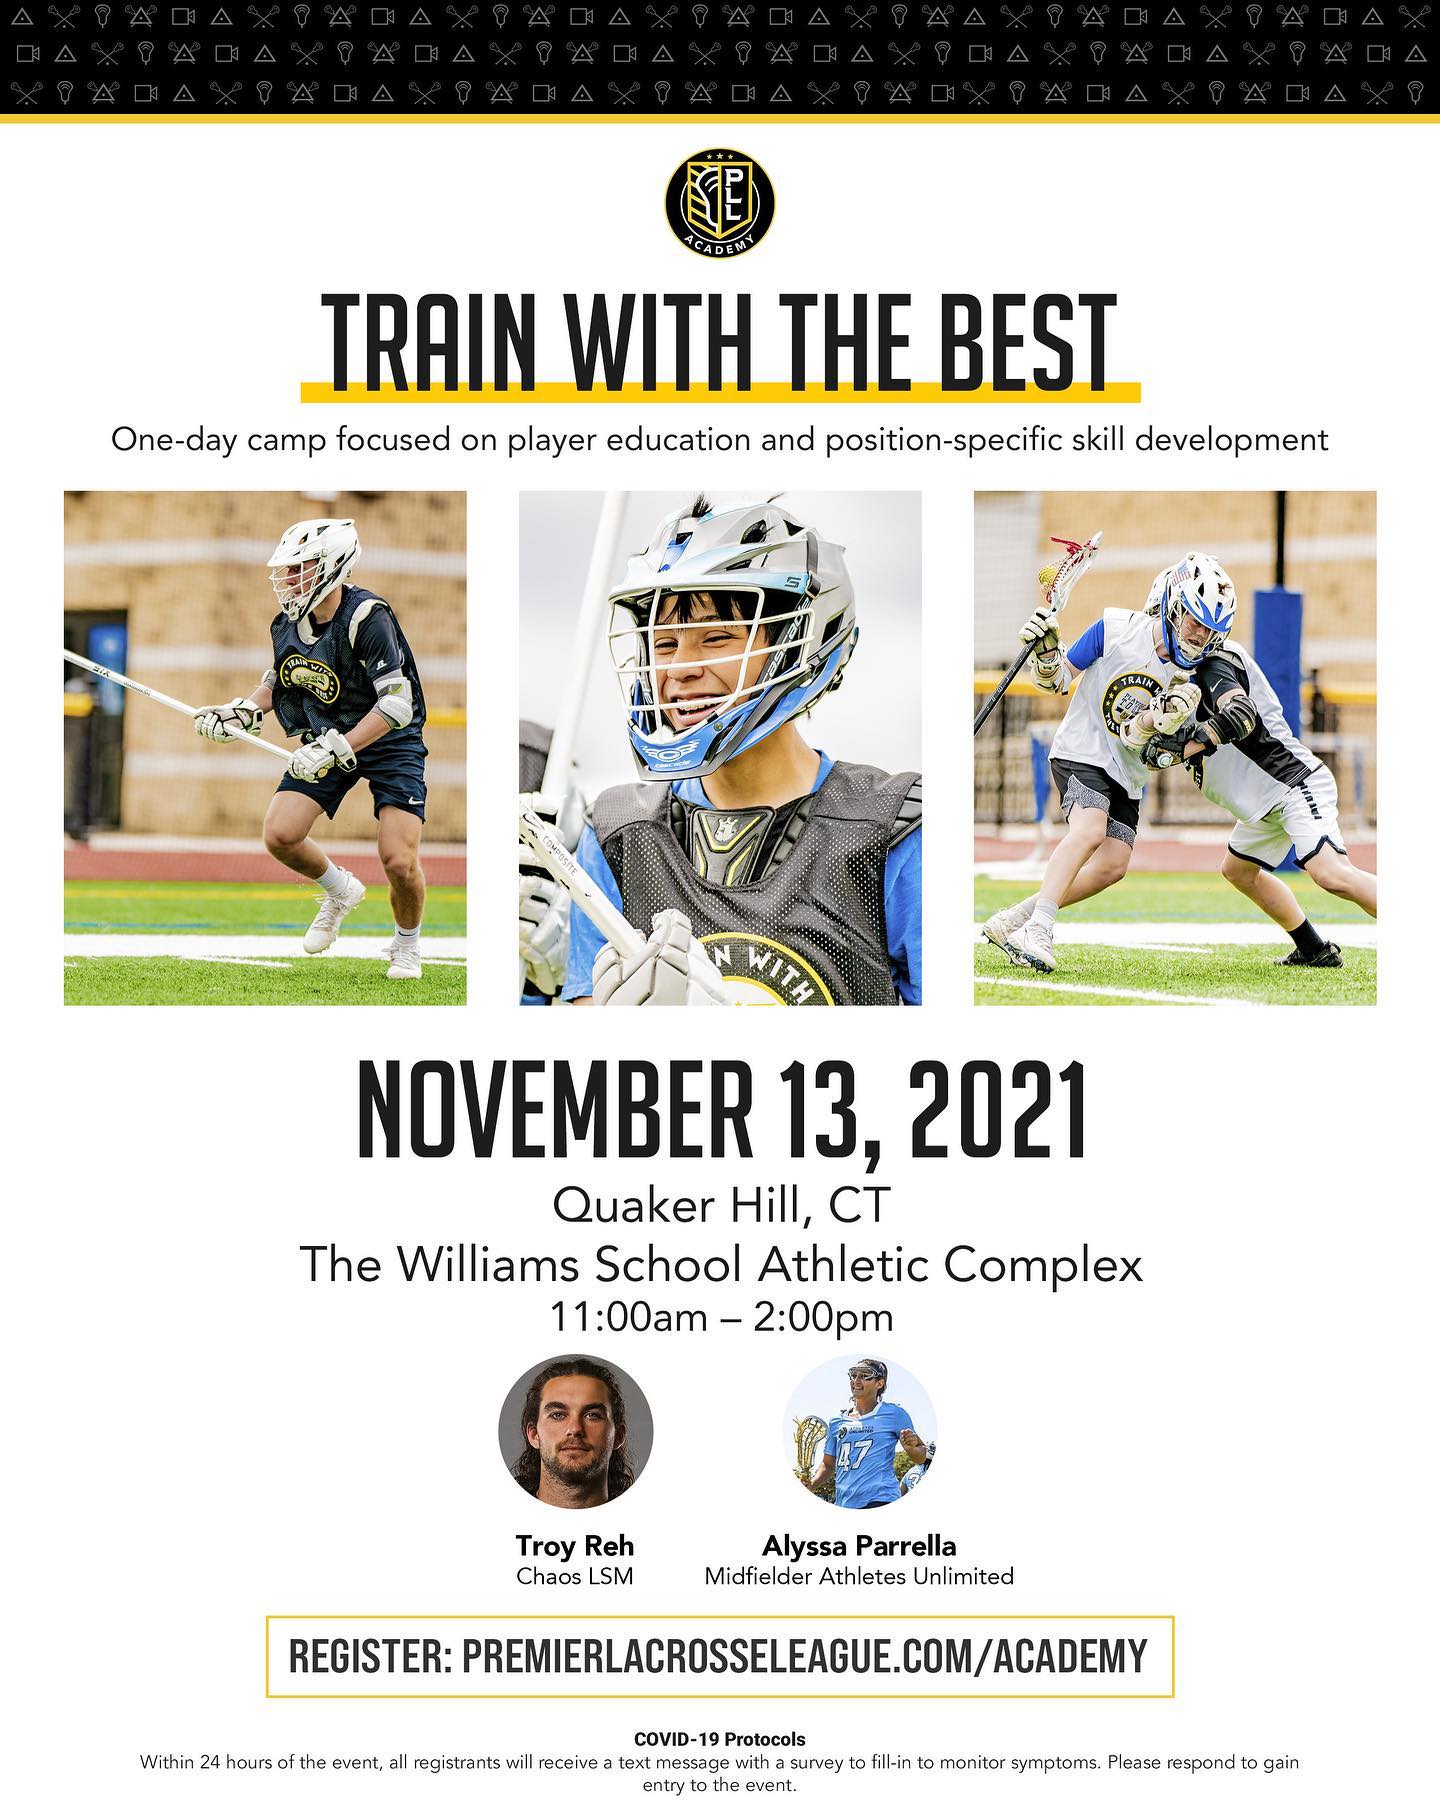 We are less than a month away from our training with PLL Academy‼️ 

🗓Saturday, November 13th 
🥍 boys & girls youth (4th-8th grade) 11am-12:30pm
🥍 boys & girls HS 12:30-2pm
📍 Williams School Athletic Complex Turf
💲99.00

Come train with some of the best players in the world! Open to all lacrosse players in the area! Sessions will focus on shooting, dodging, agility training, passing, defense, communication, and lacrosse IQ development. 

Register with the link in our bio 🔗